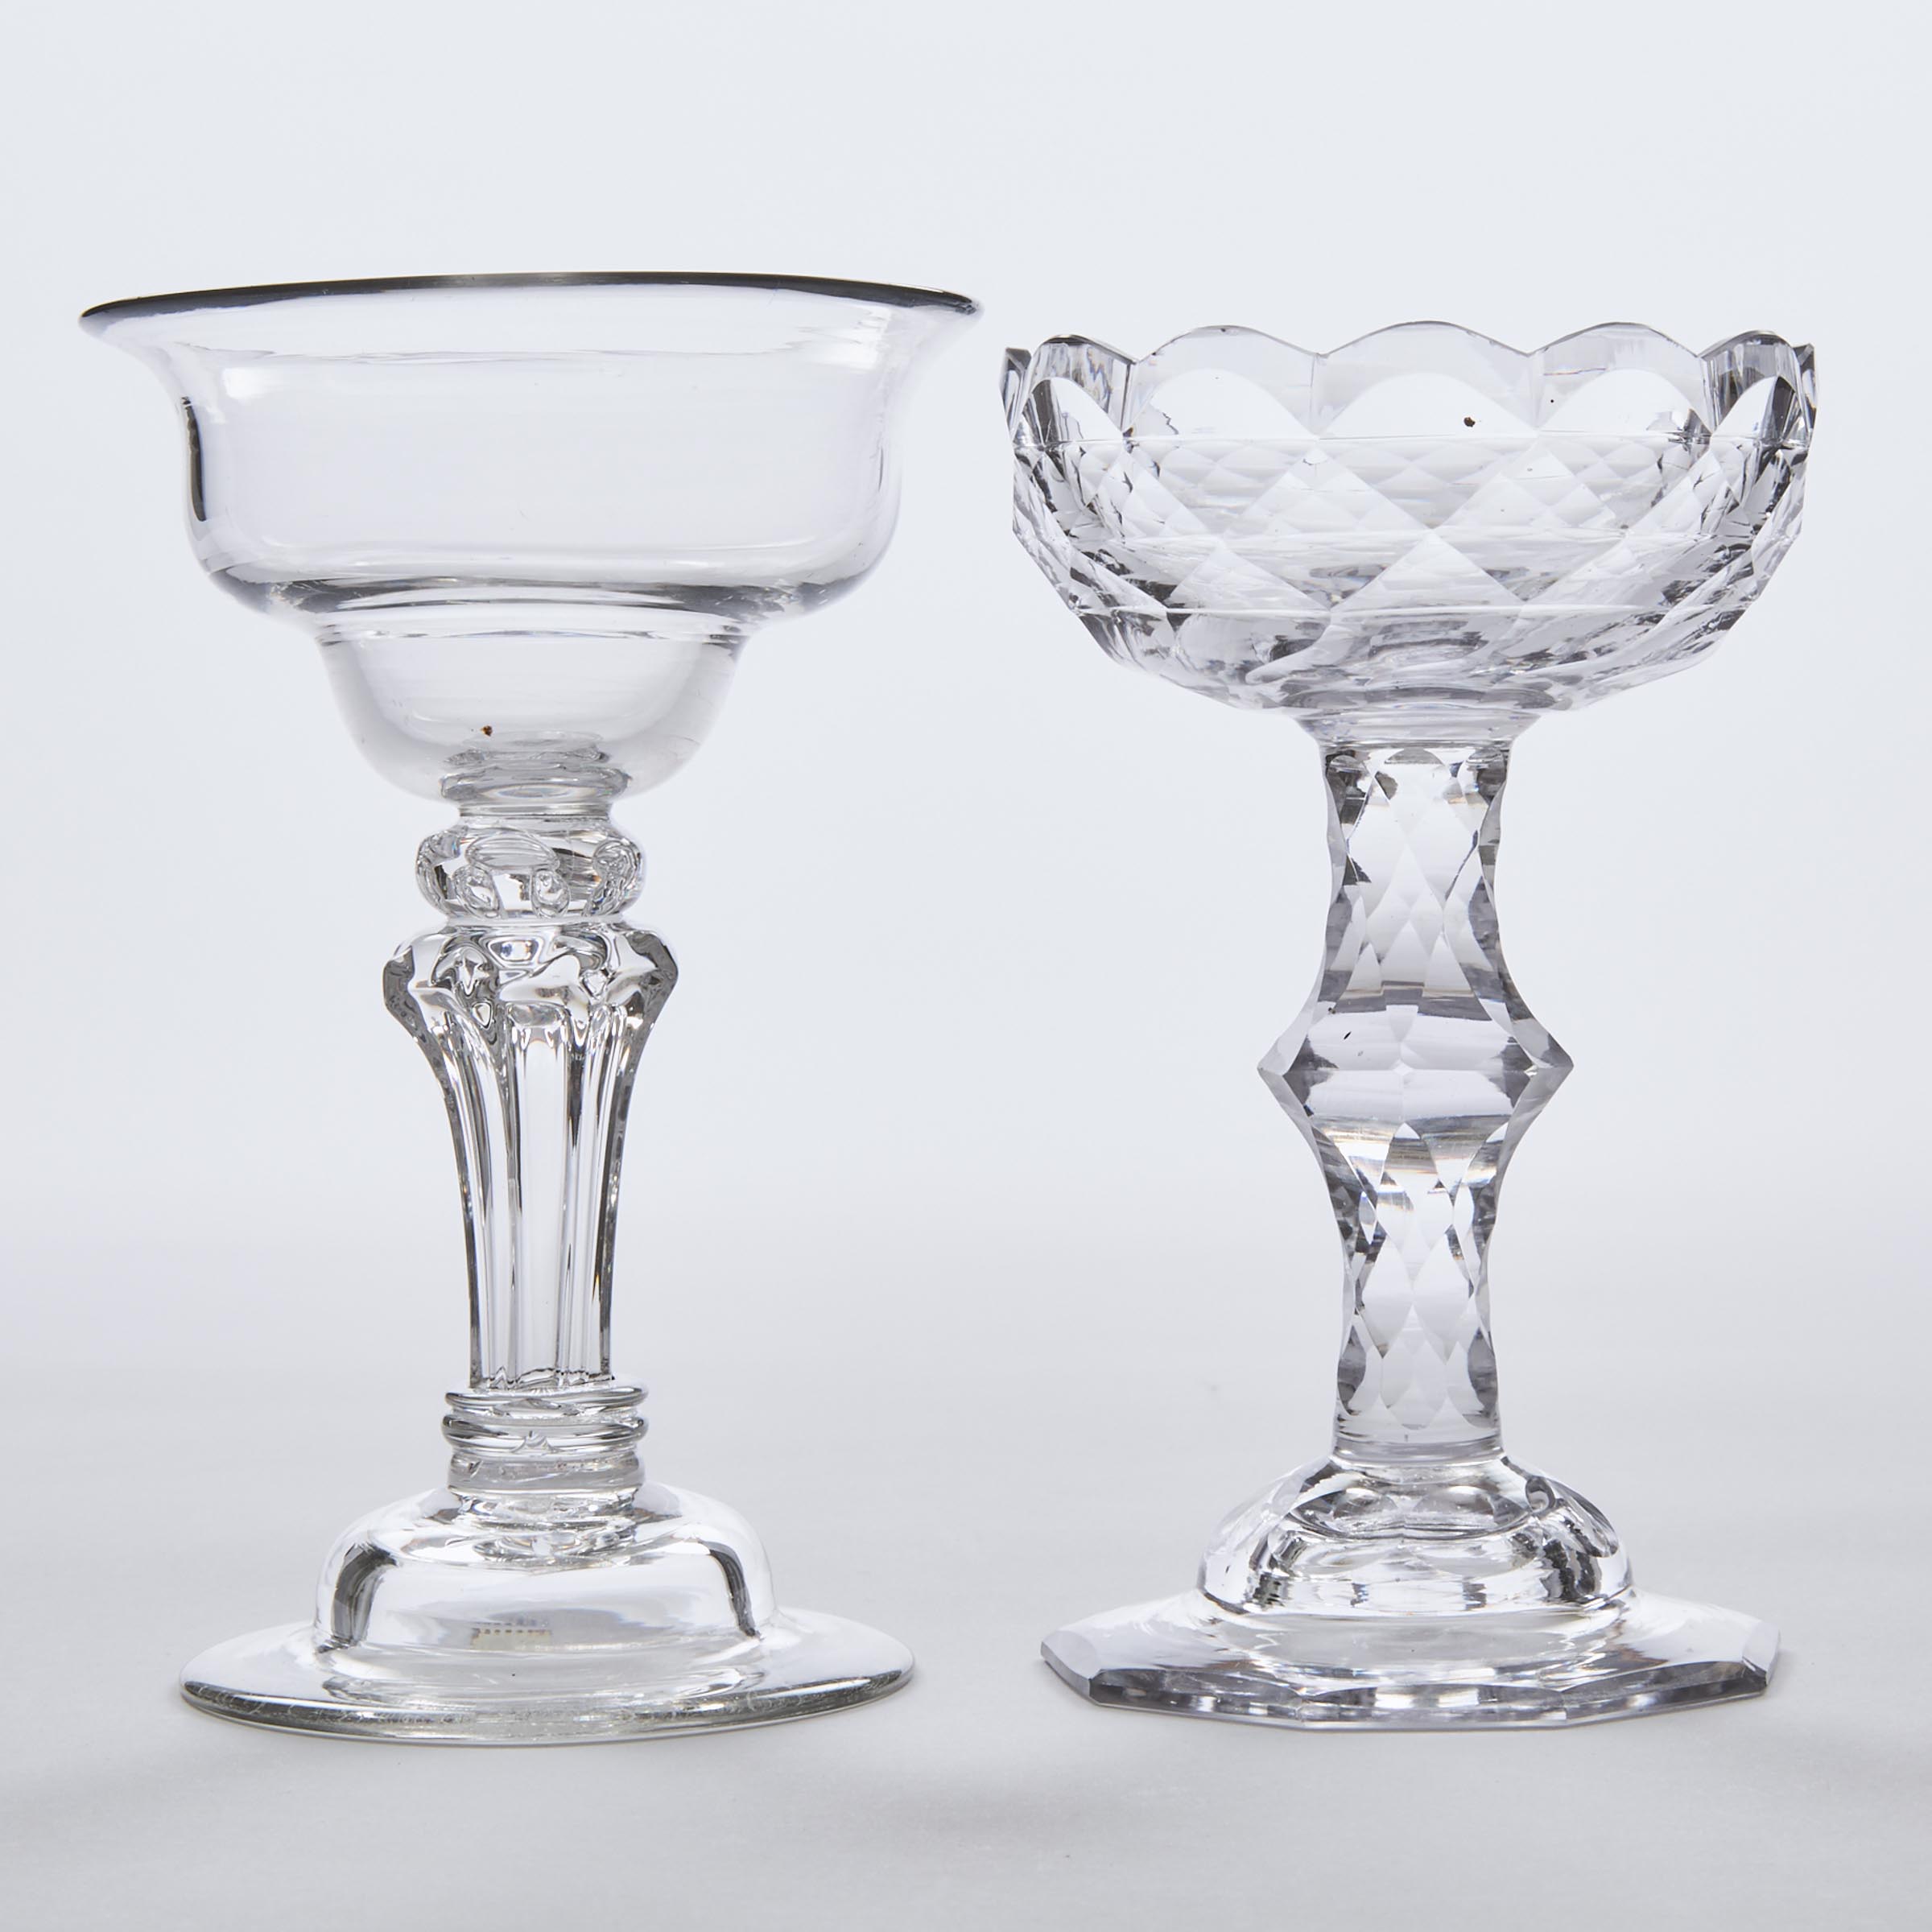 Two English Faceted or Moulded Pedestal Stemmed Sweetmeat Glasses, 18th century